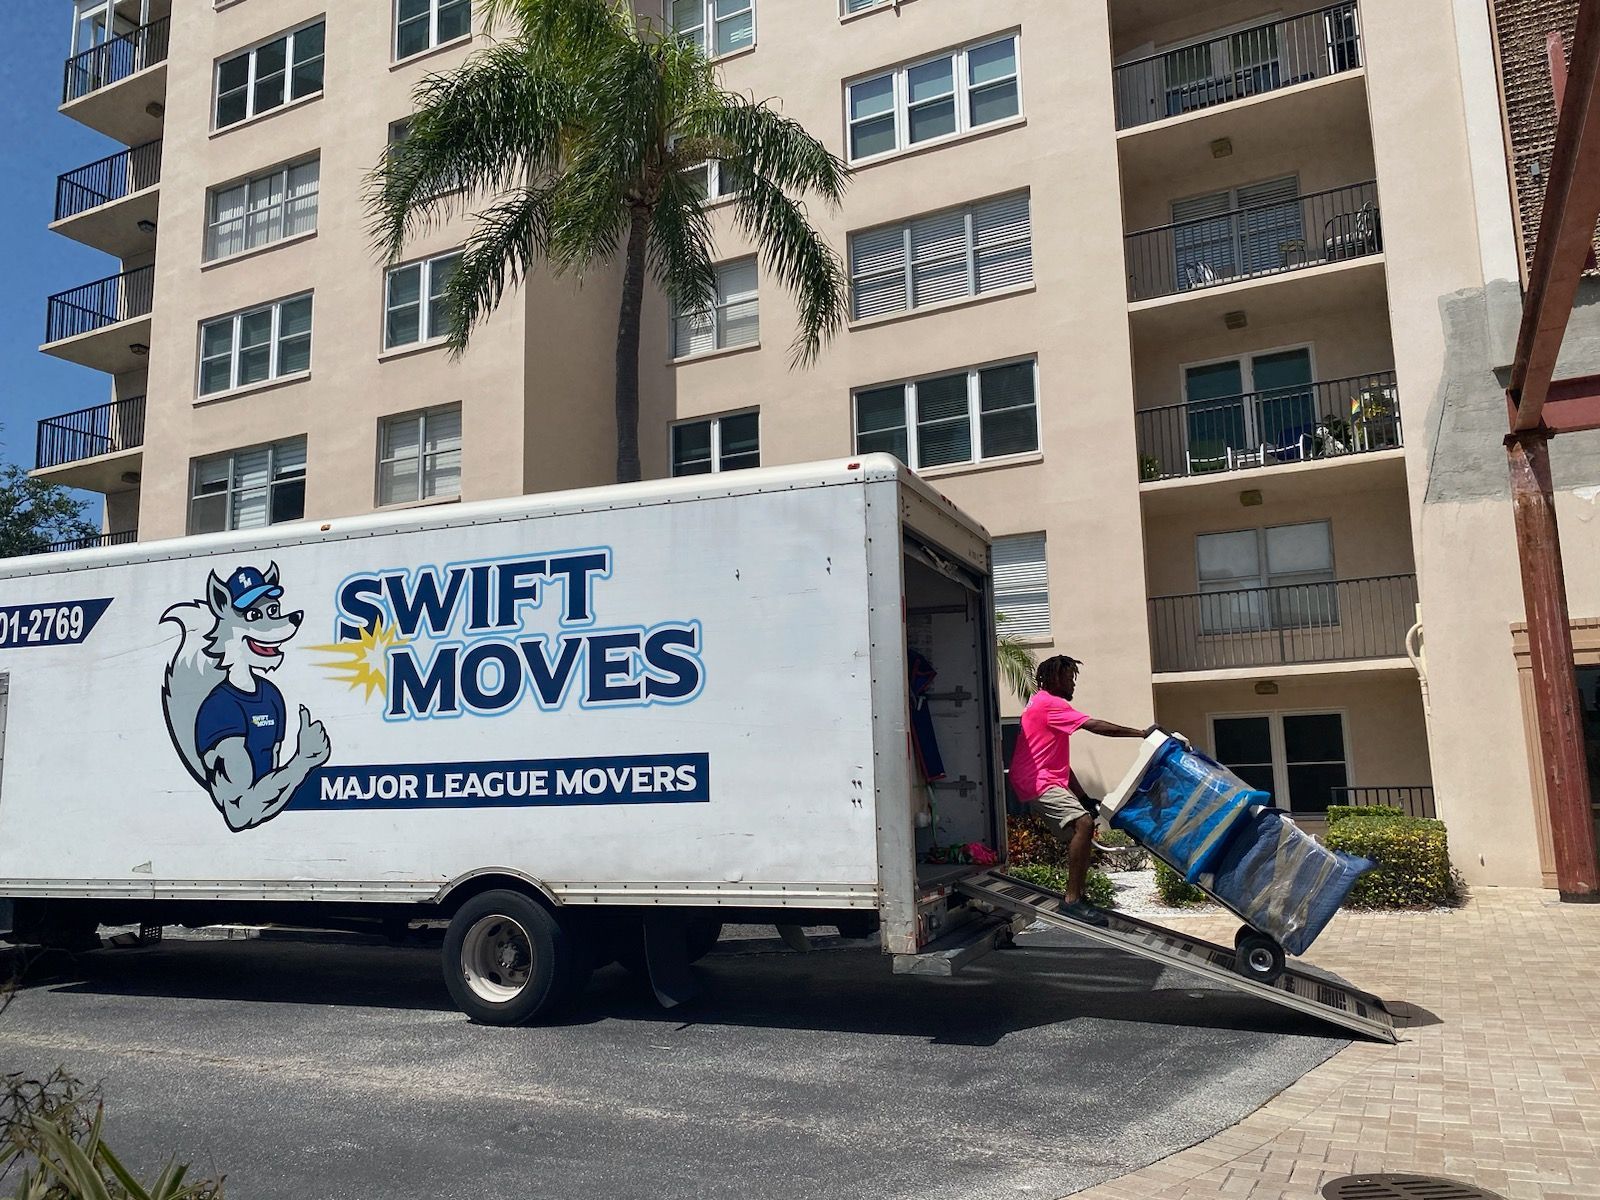 Swift Moves Large Trailer Truck